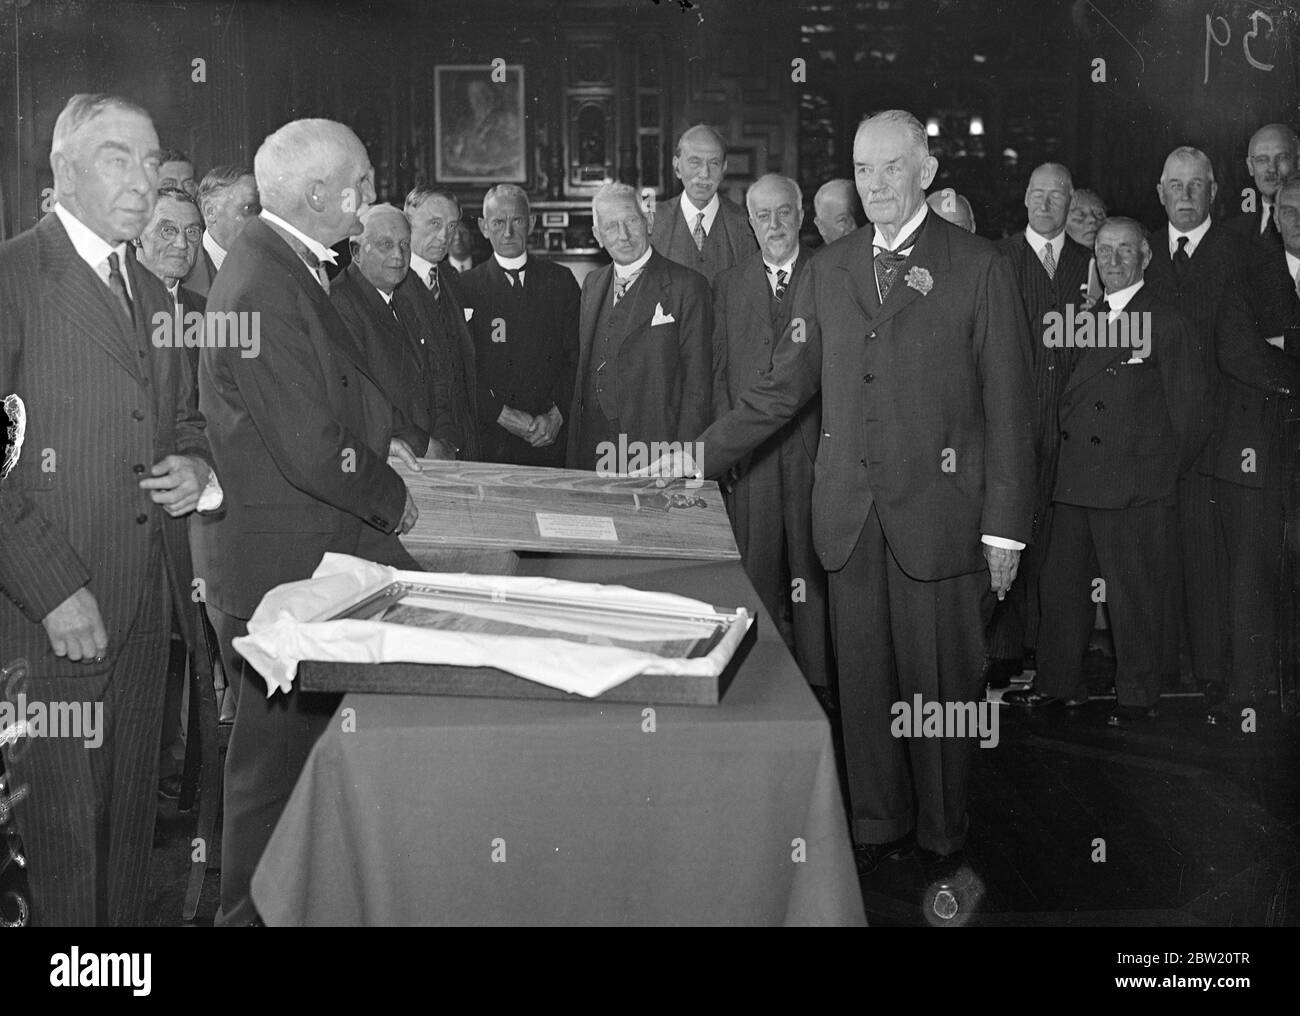 Lord Desborough, who is retiring after 41 years service Chairman of the teams Conservancy Board, was presented with a sword, said to date from 800 BC recovered from the bottom of the Thames at the Board's office on the Embankment. Lord Desborough (right) receiving the sword from Mr B. Holmes. 12 July 1937 Stock Photo